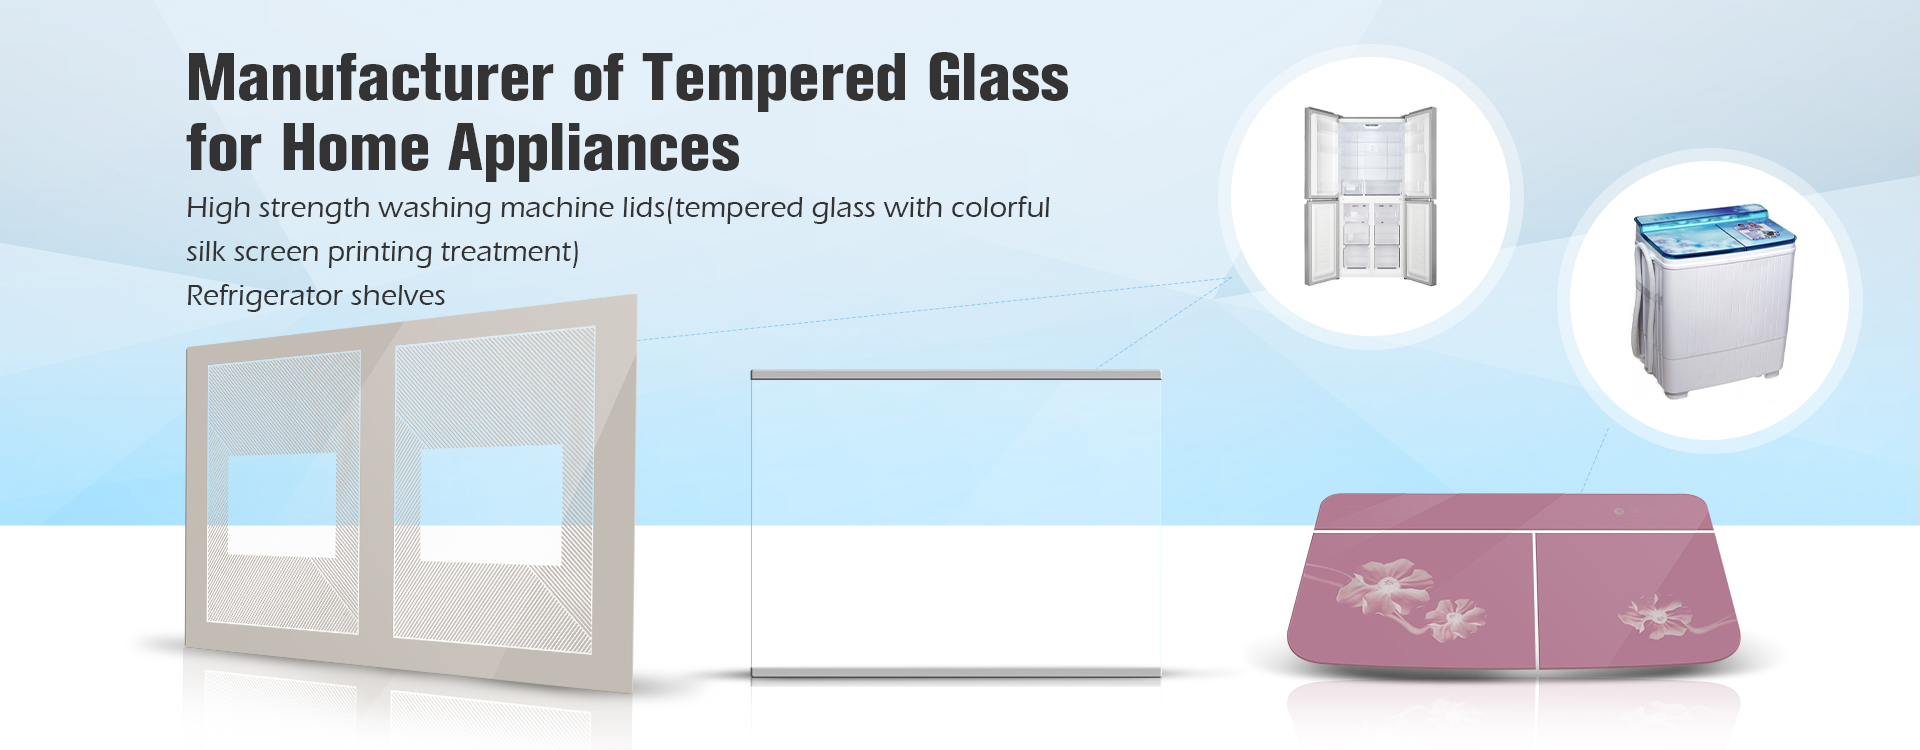 Tempered Glass Standards